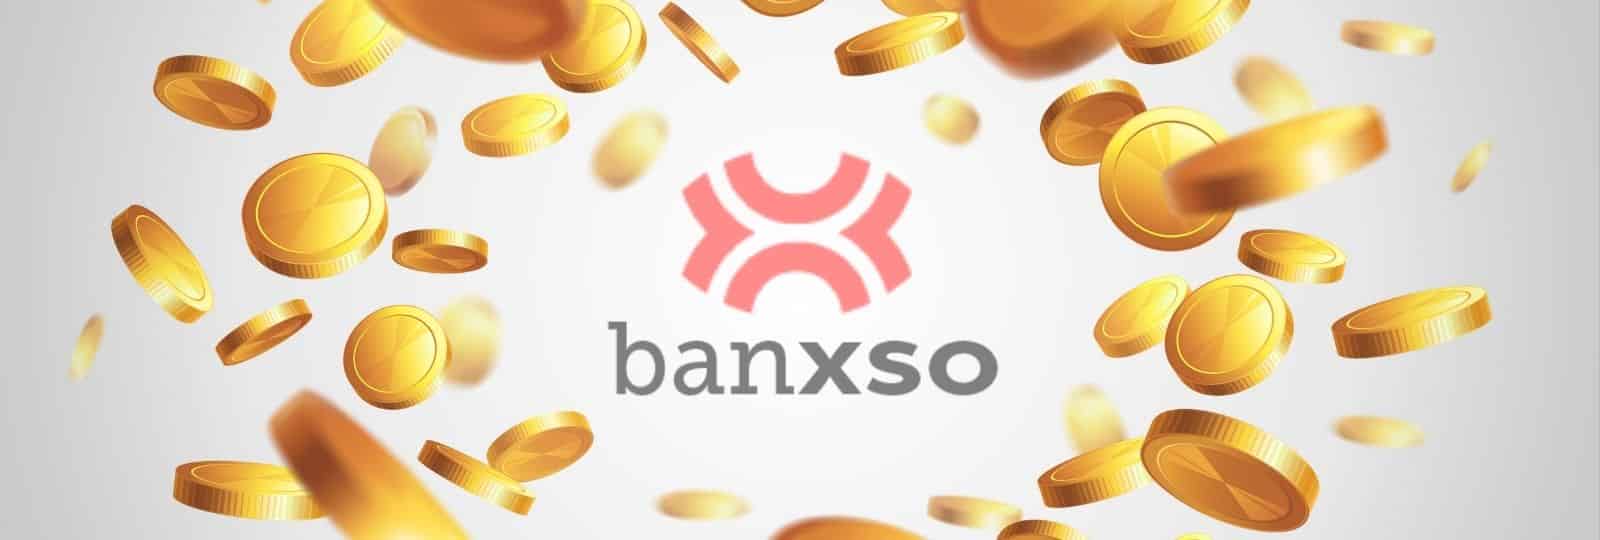 Trading Through Banxso Will Lead to an Ultimate Success